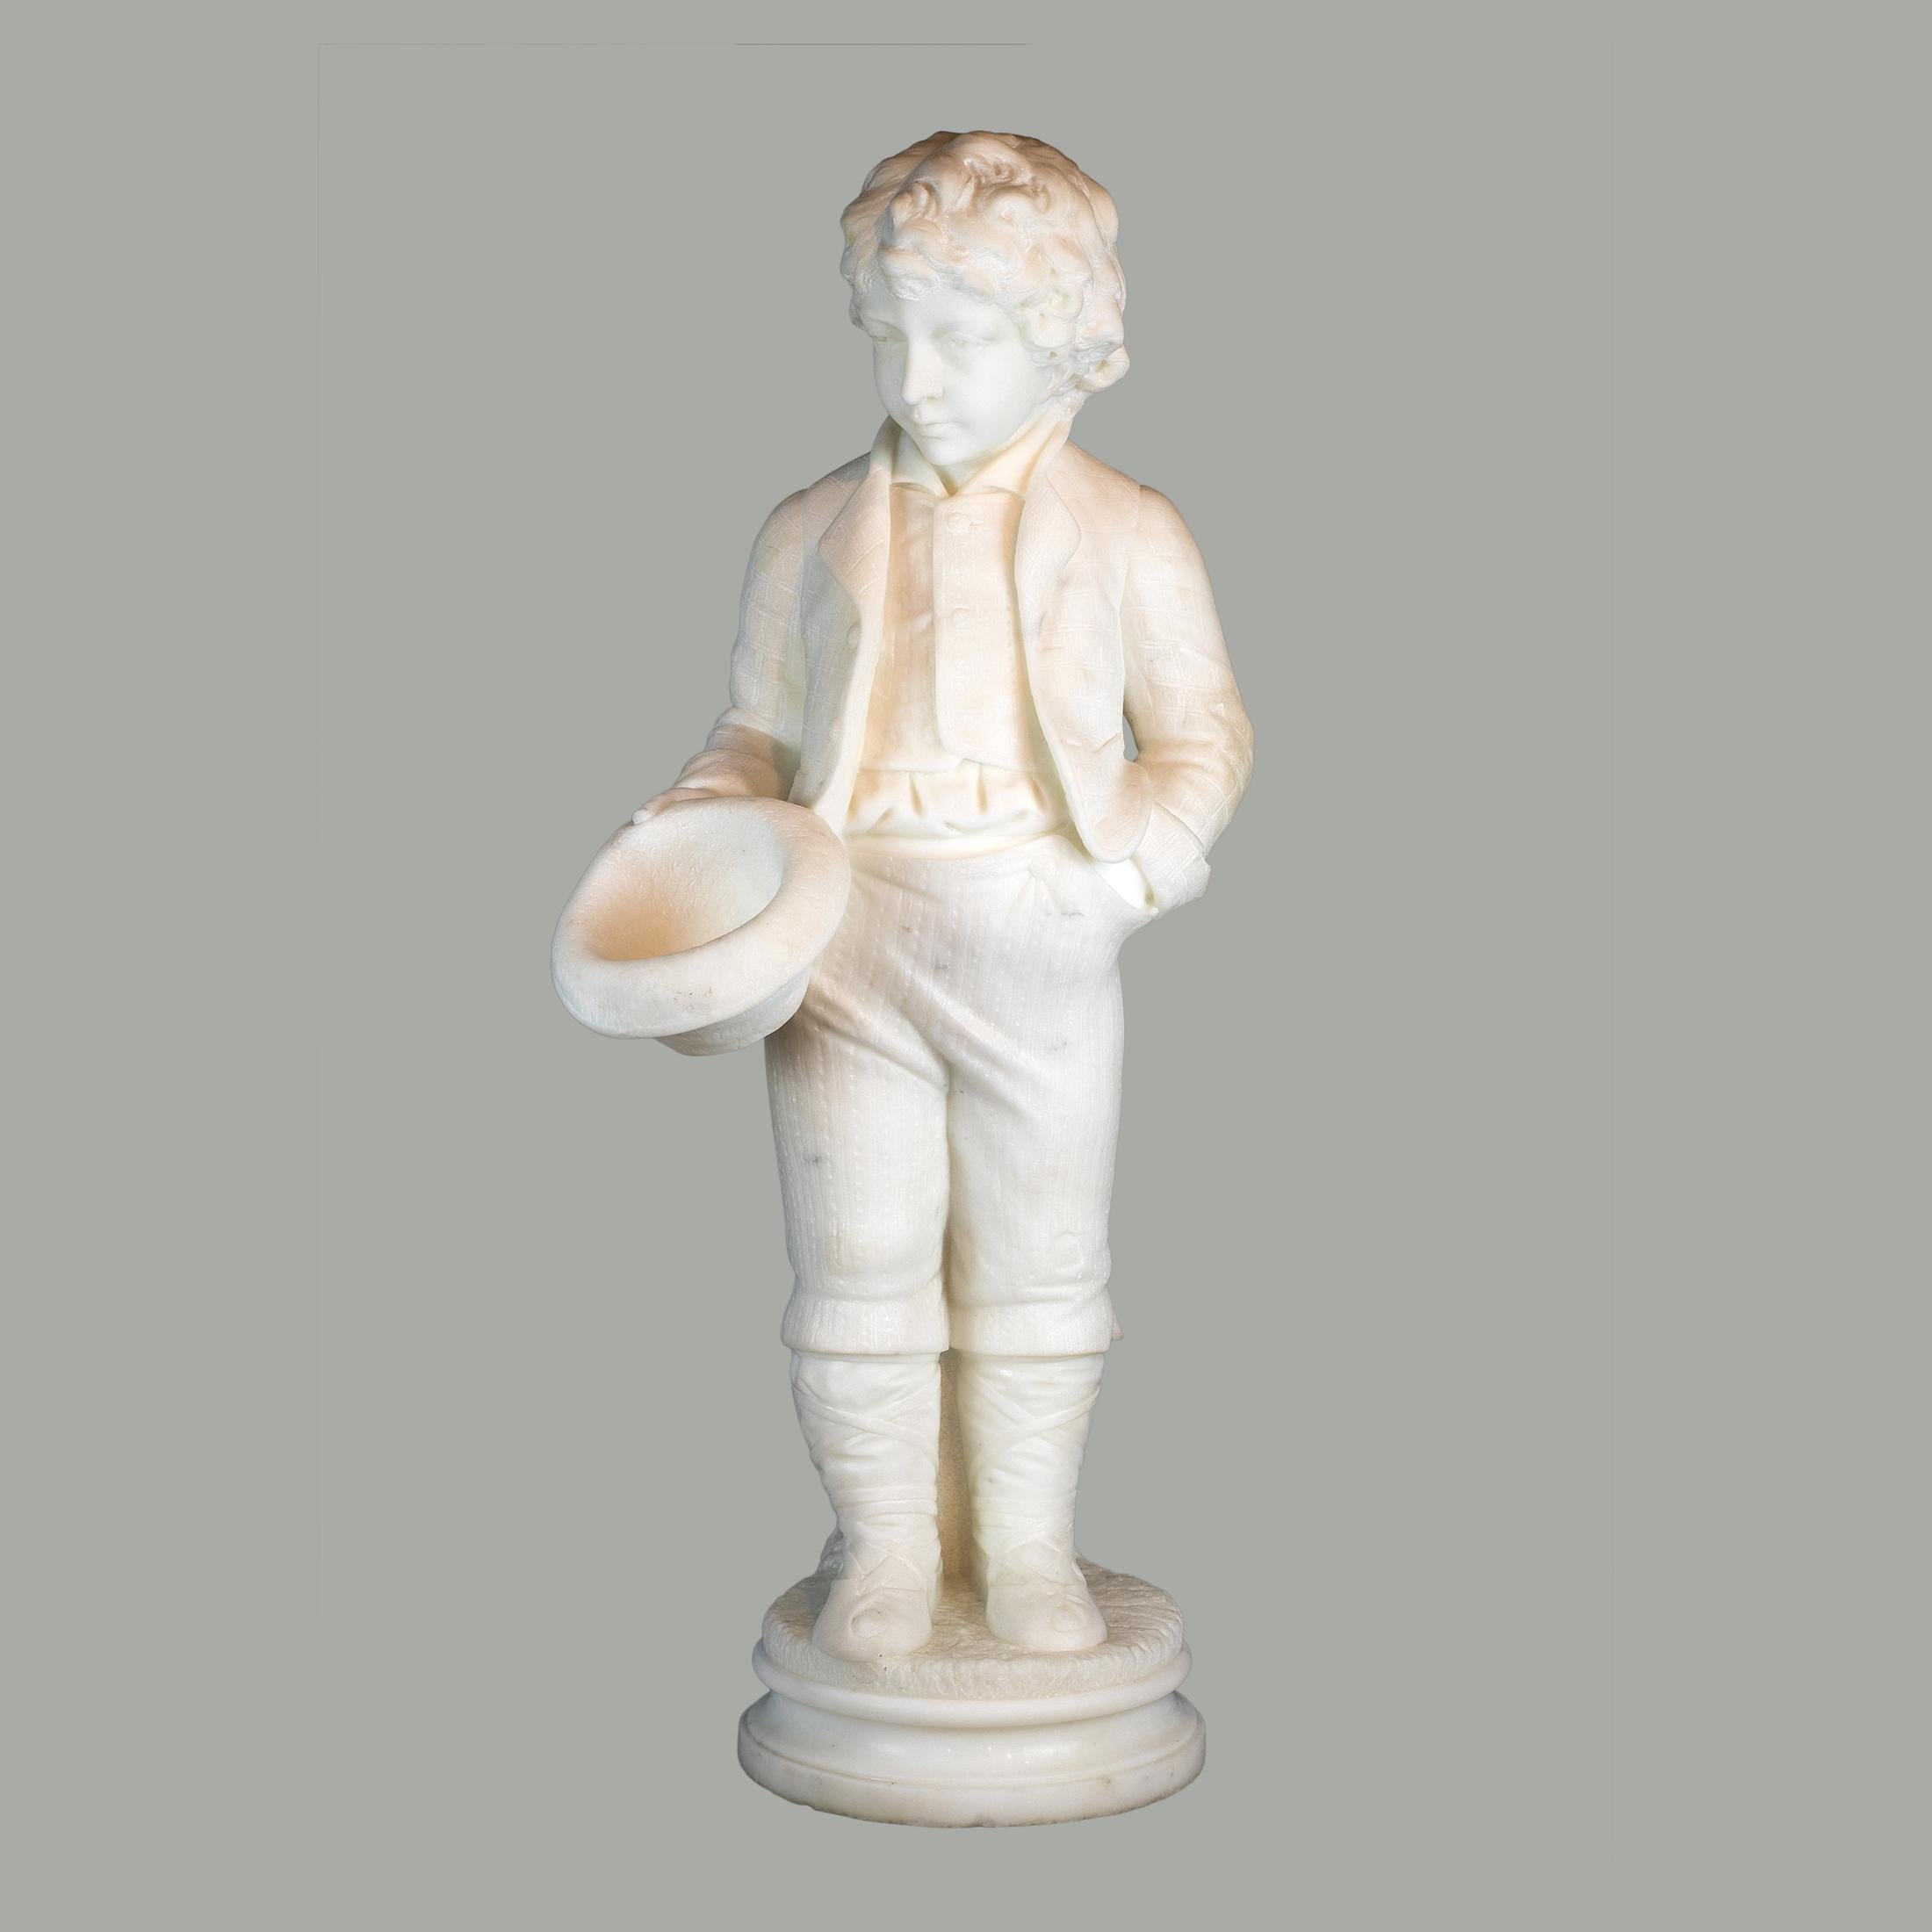 ANTONIO PIAZZA
Italian, (Late 19th/Early 20th Century)

signed 'A. Piazza Carrara'  
33 1/2 x 14 in. x 13 in.


Notes: A Fine Italian Carrara Marble Figure of a Boy Holding a Hat